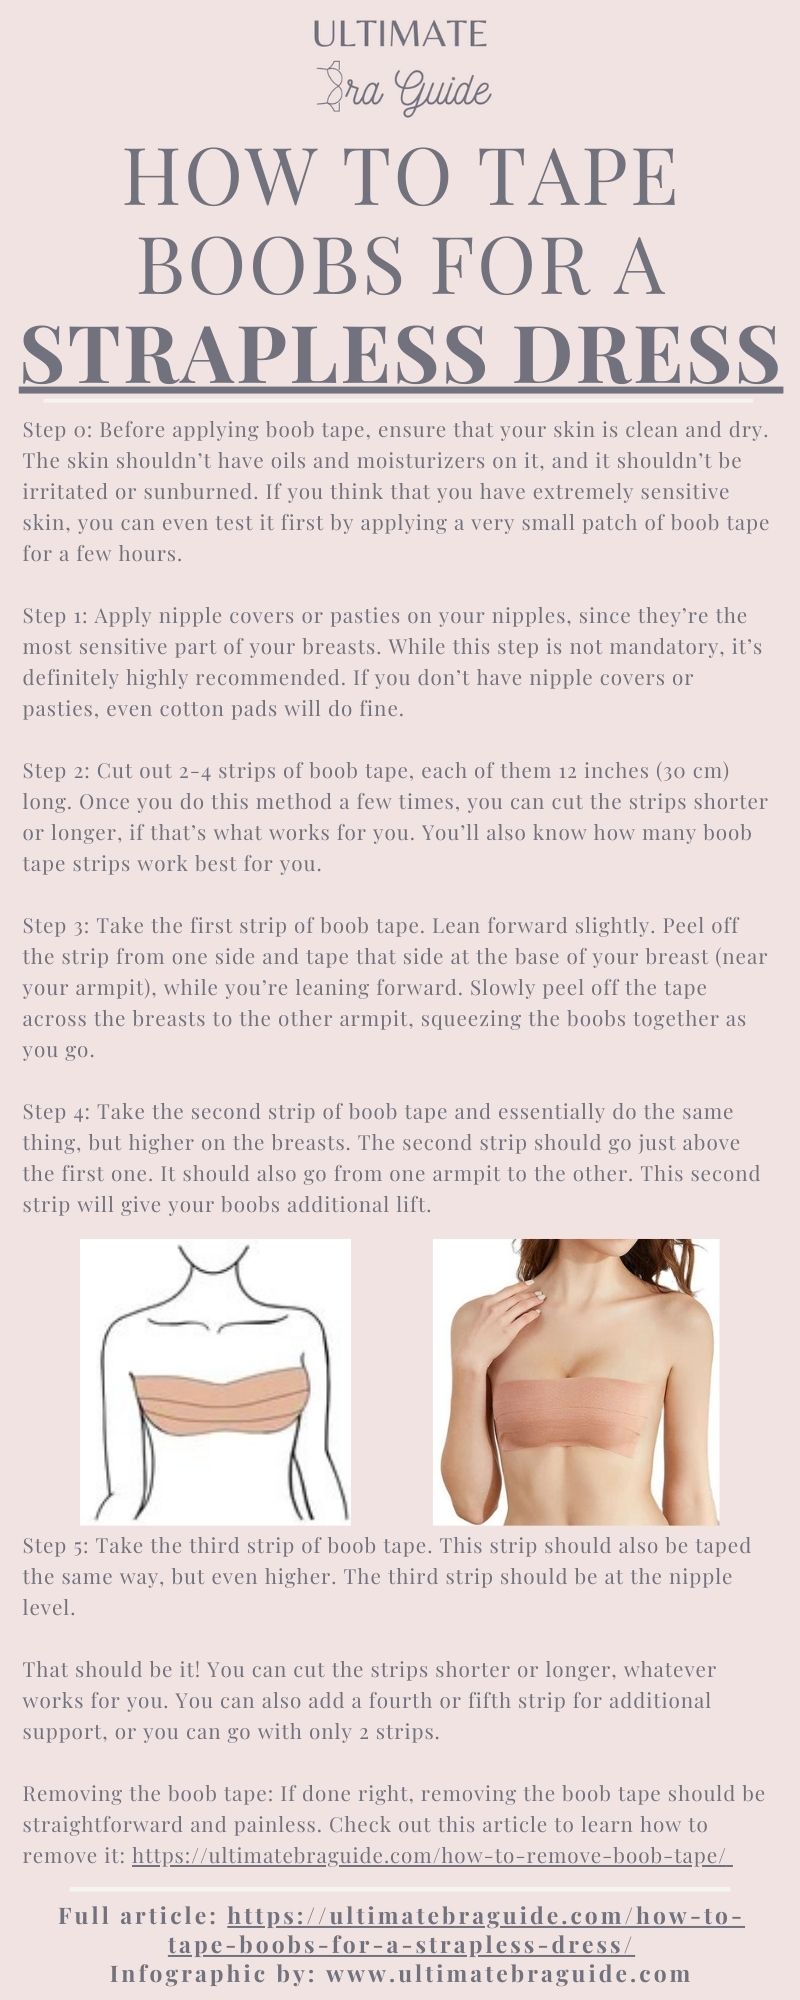 How To Tape Boobs for a Strapless Dress Infographic - This shows a step by step guide to taping your breasts for a strapless dress